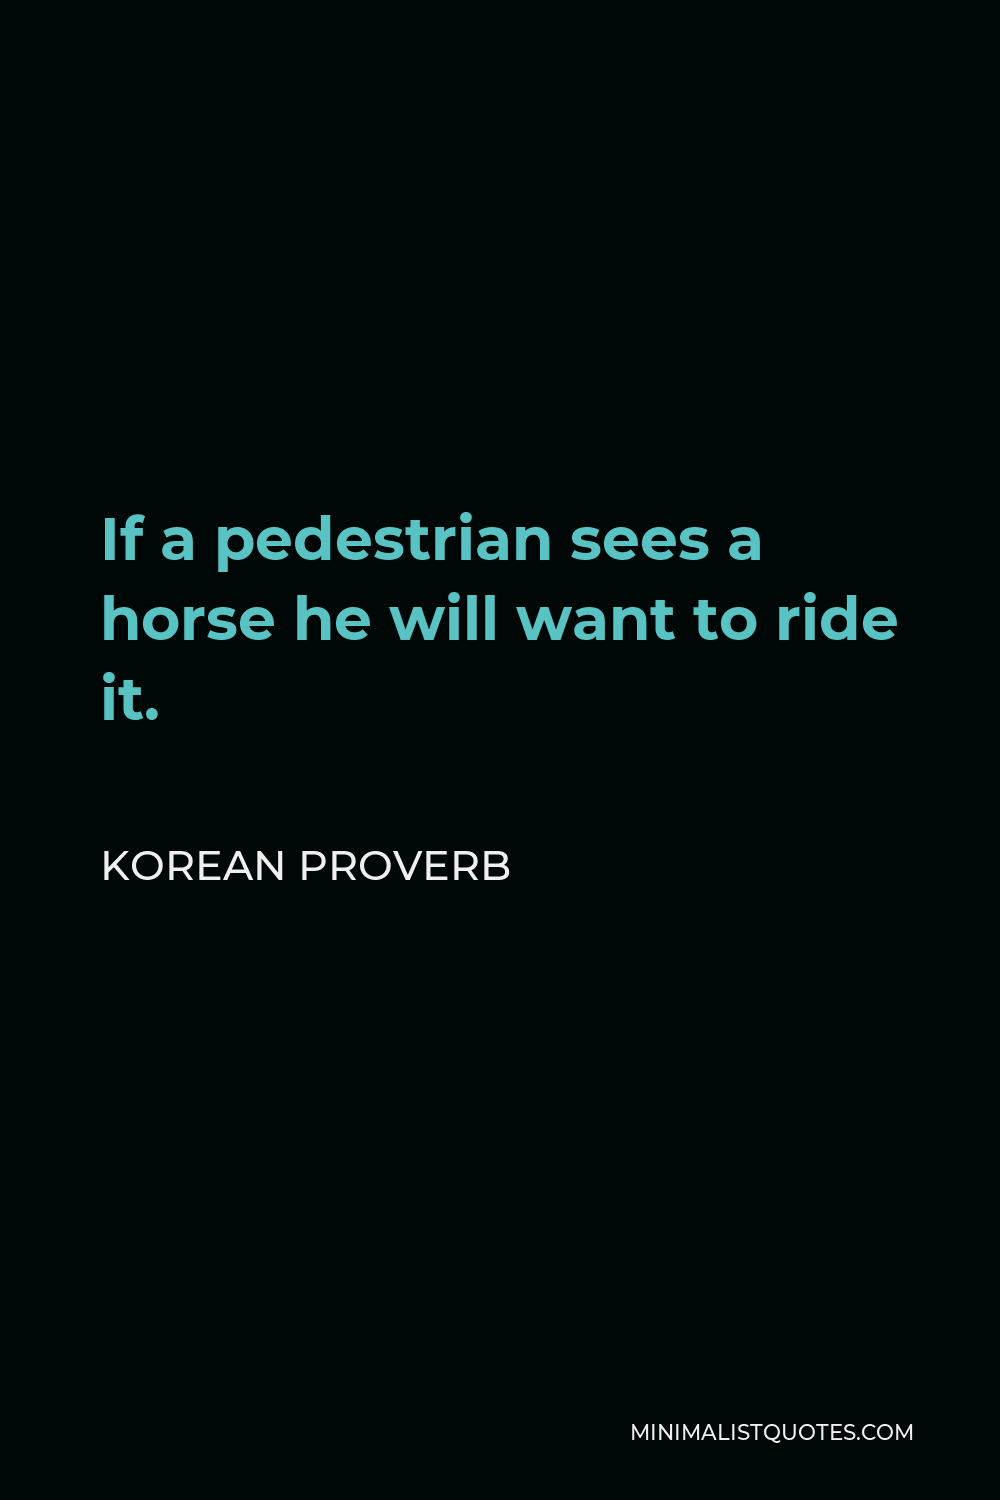 Korean Proverb Quote - If a pedestrian sees a horse he will want to ride it.